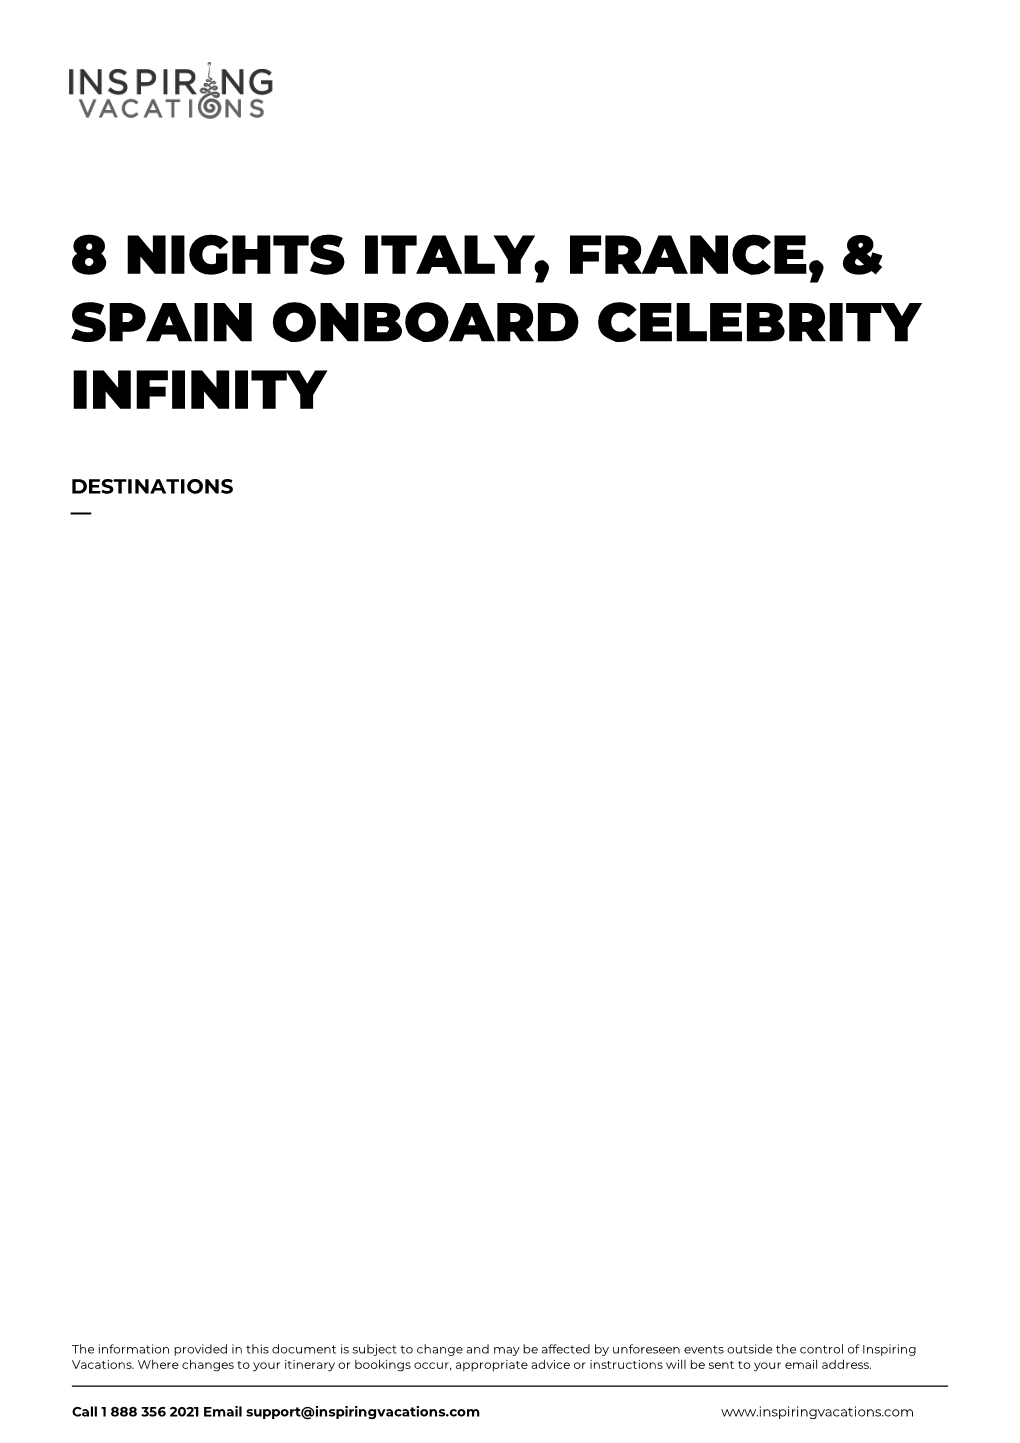 8 Nights Italy, France, & Spain Onboard Celebrity Infinity